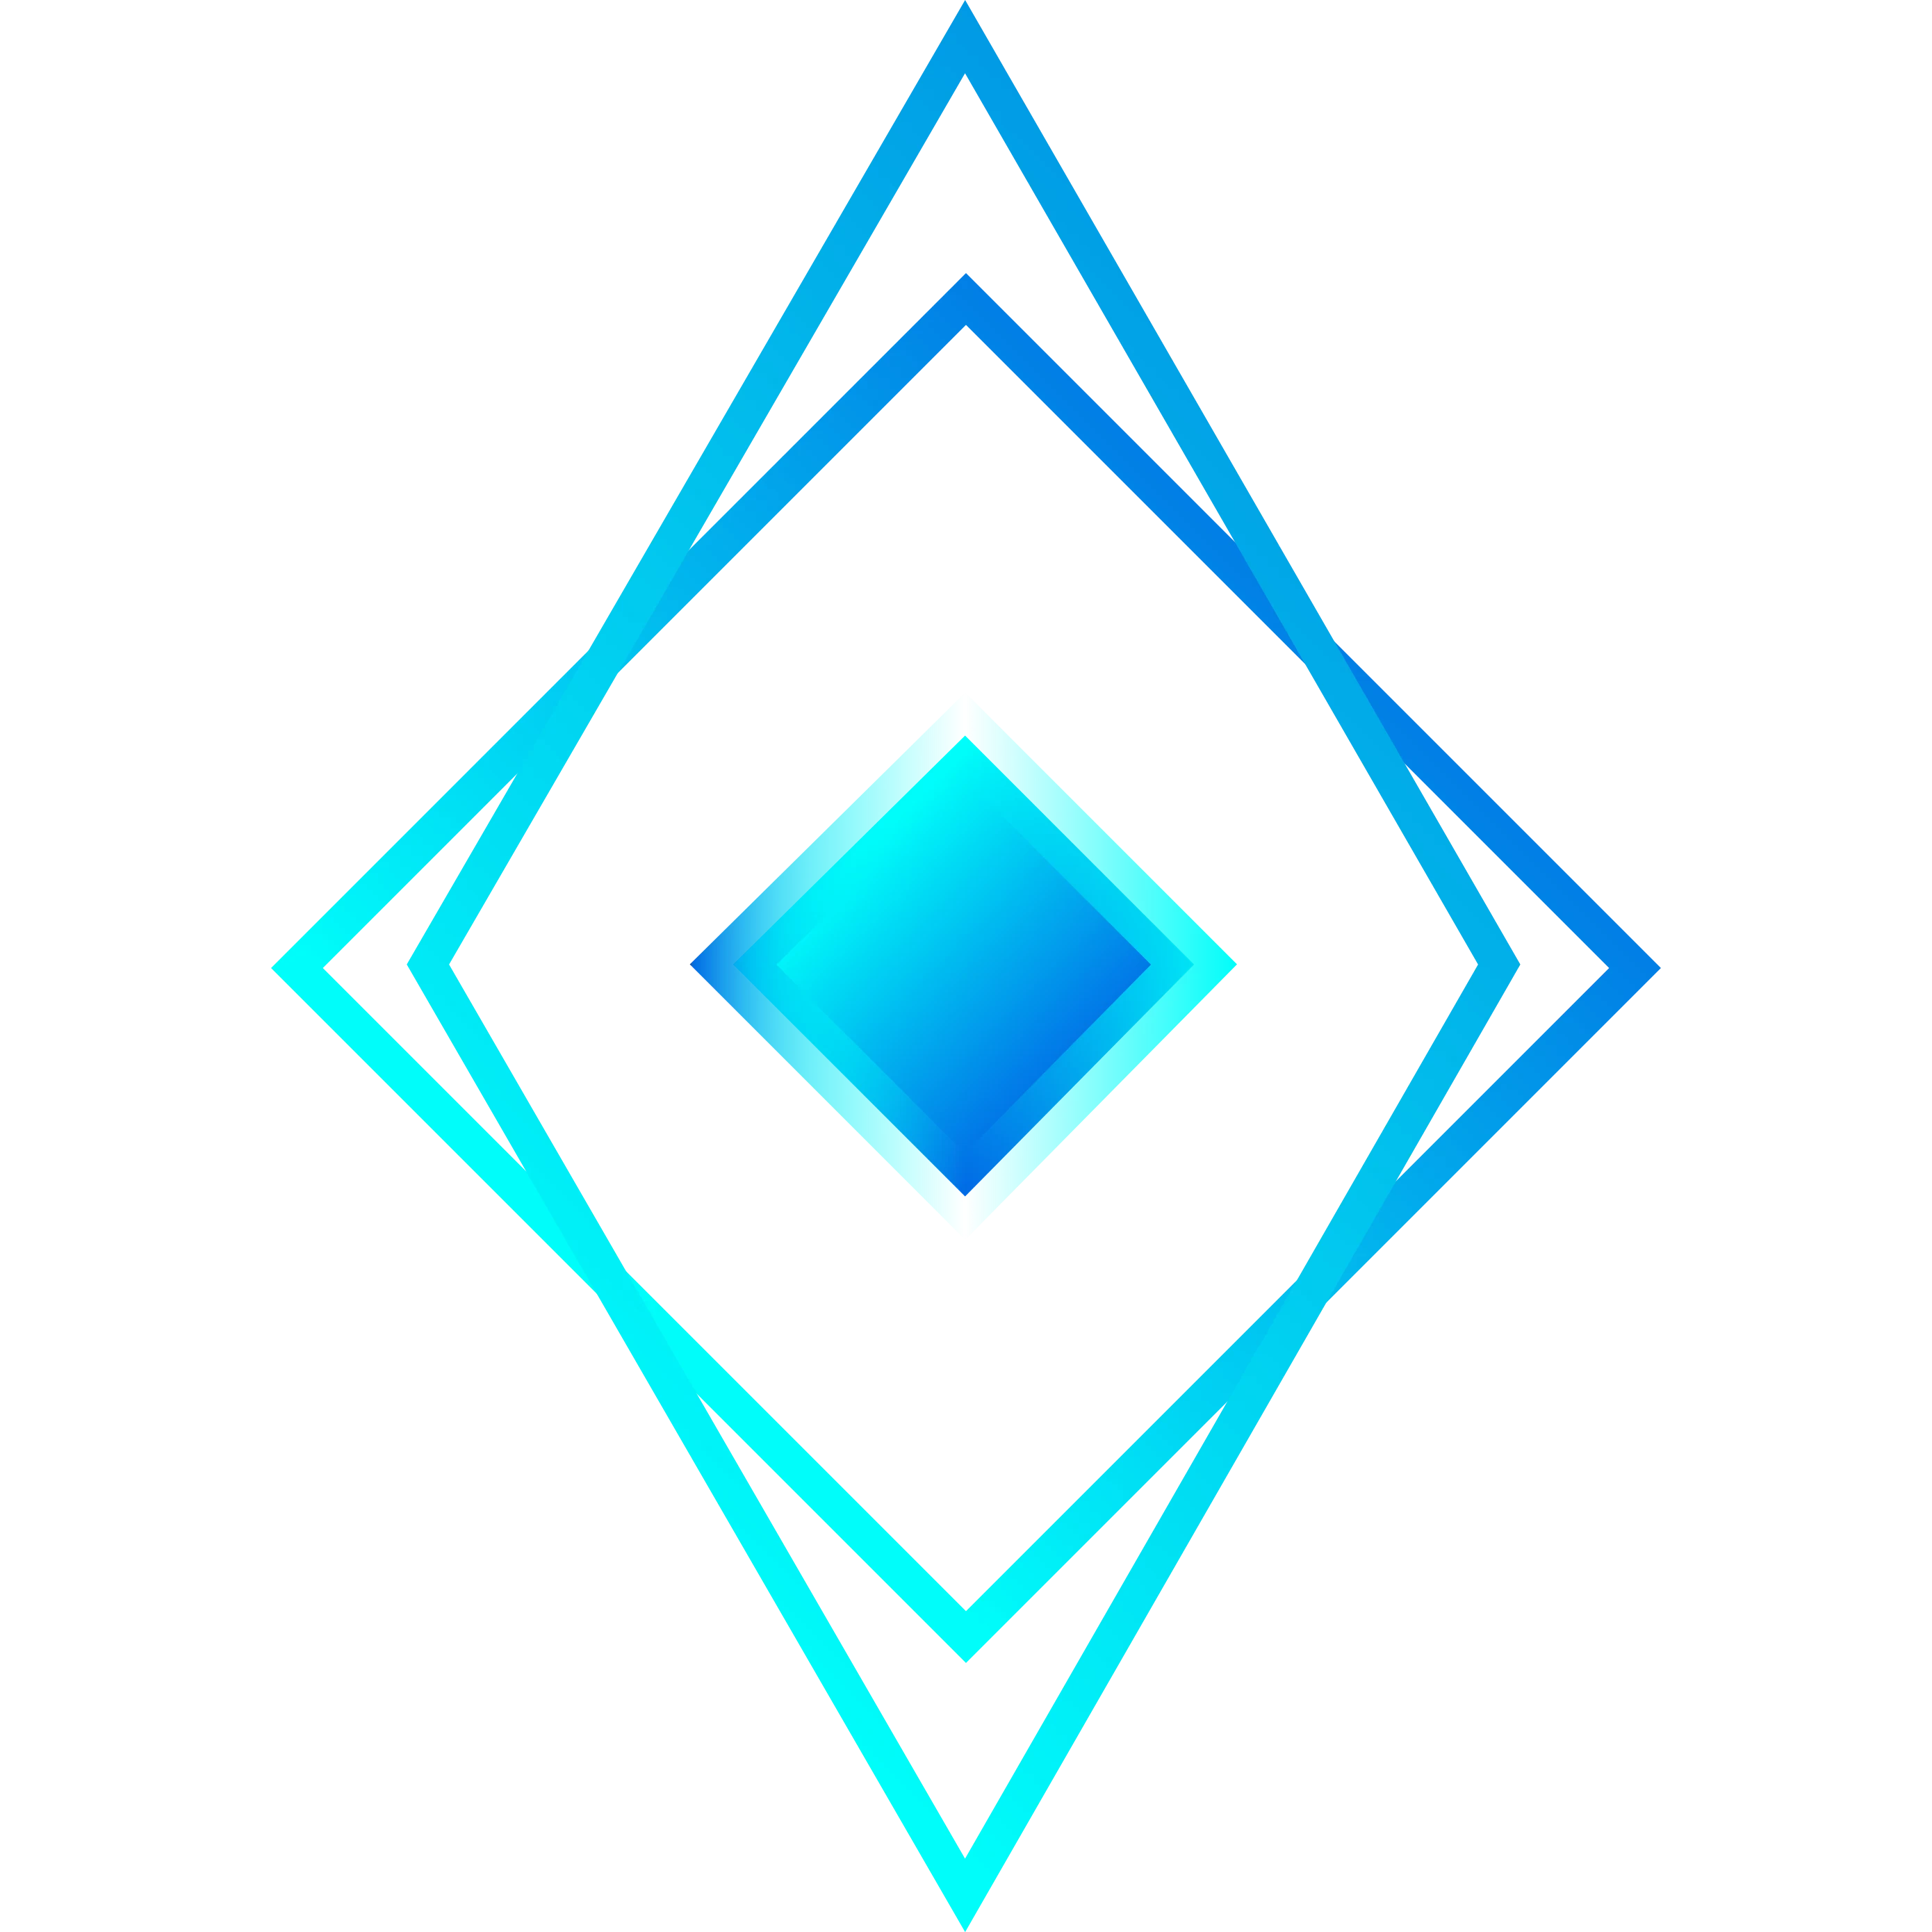 Ether Zero logo in png format